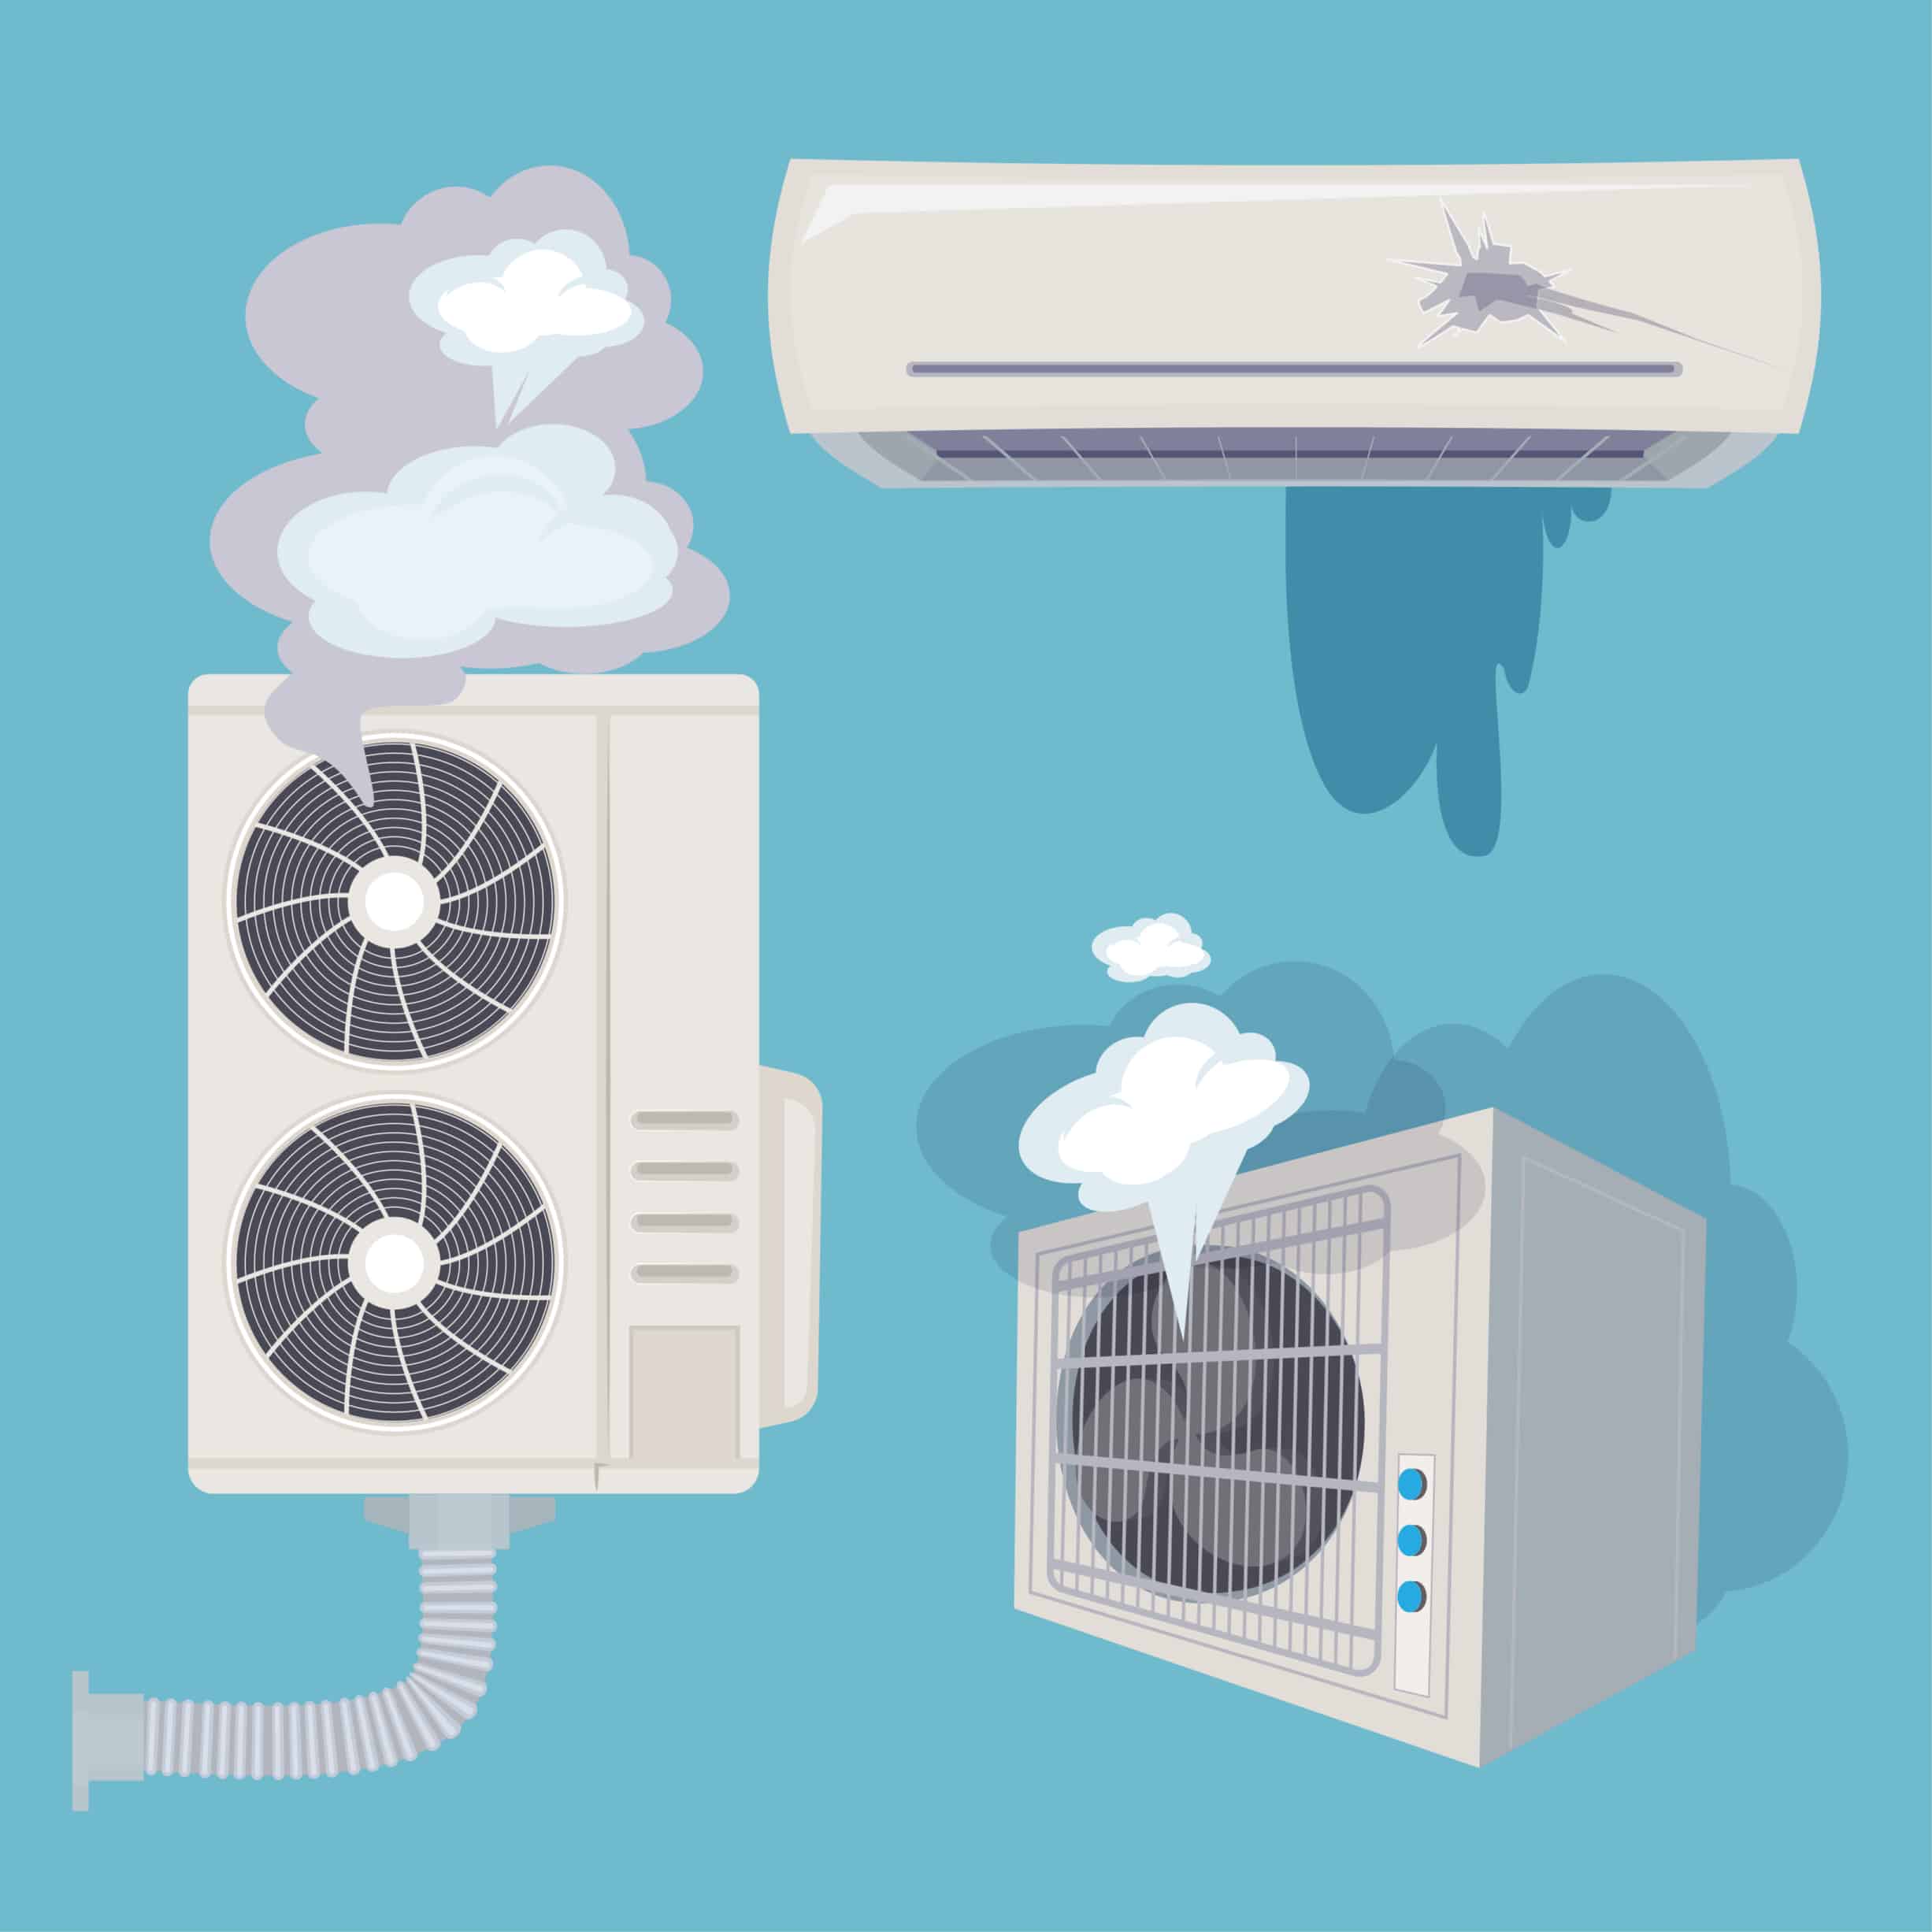 Air Conditioner Not Cooling? 22 Easy Ways To Fix [Guide] - Crown Power